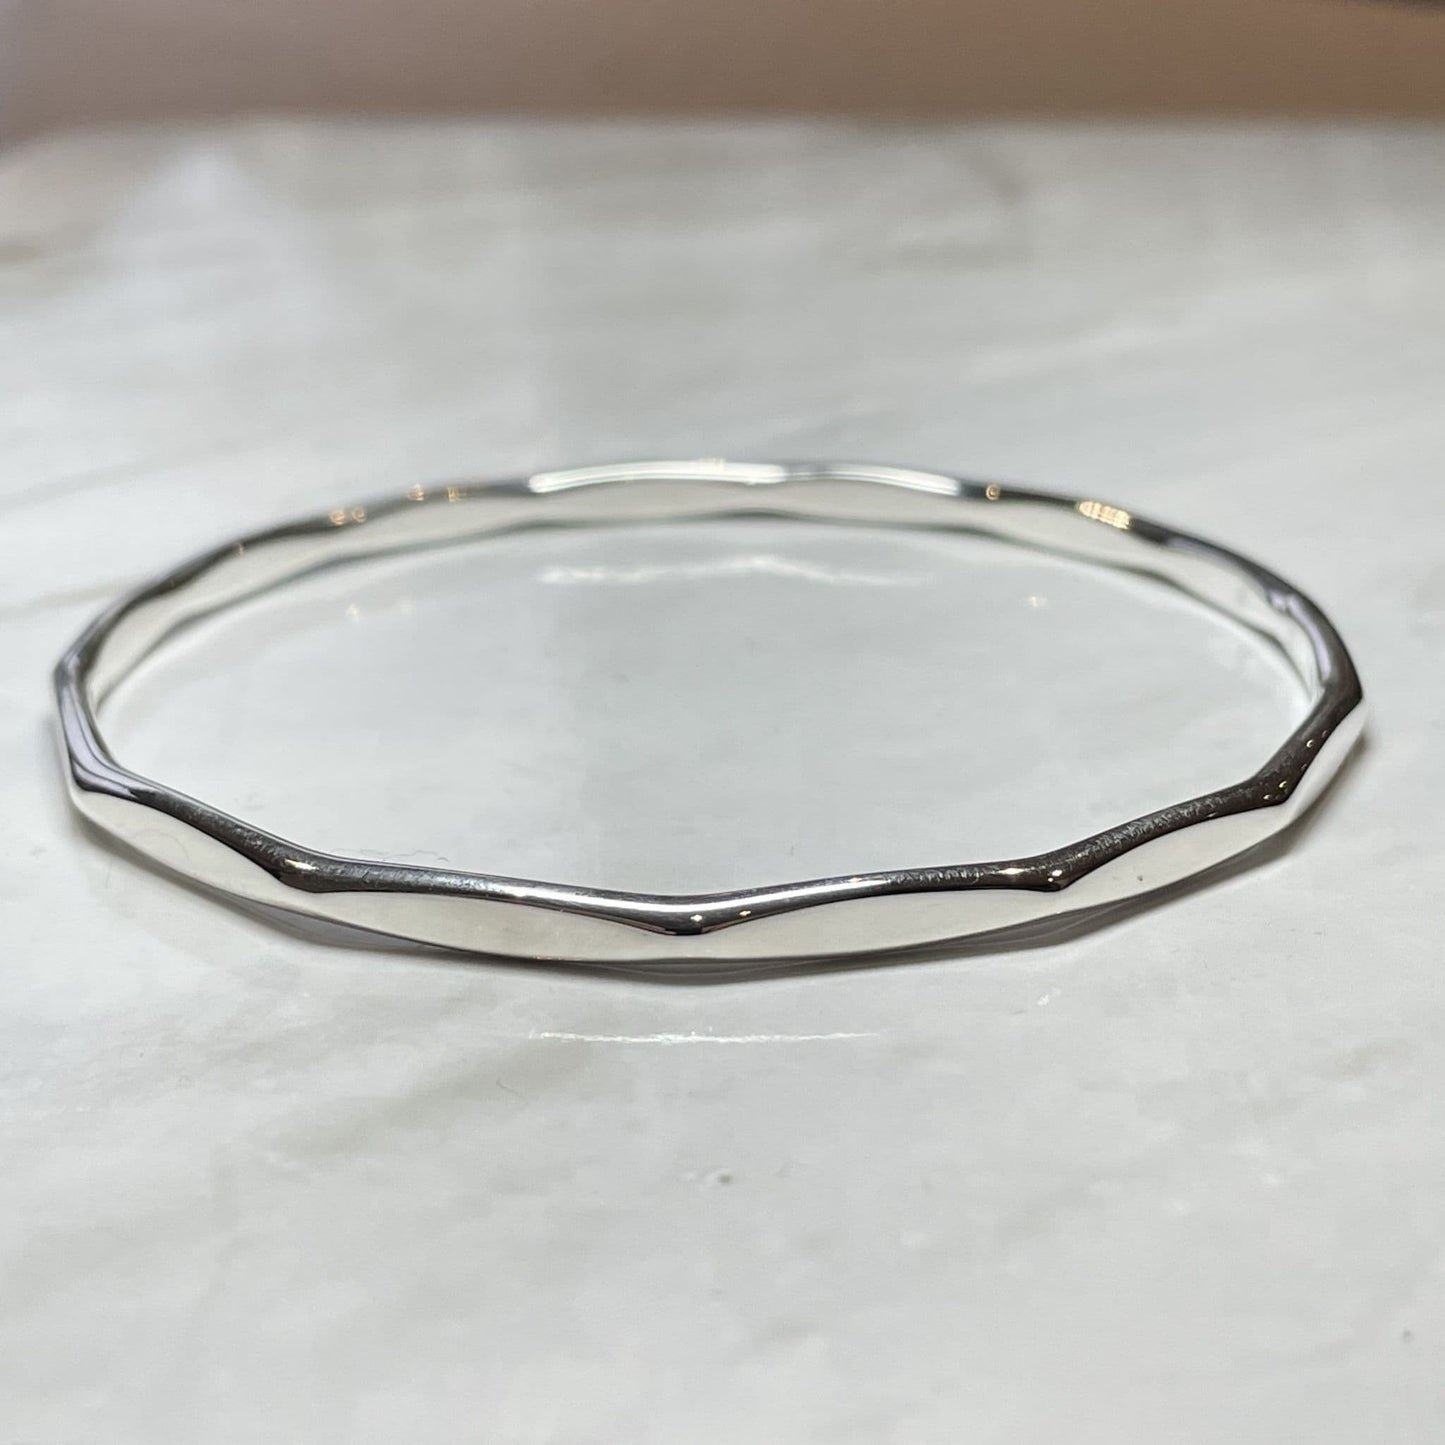 3 mm Heavy Round Faceted Plain Sterling Silver Polished Slave Bangle